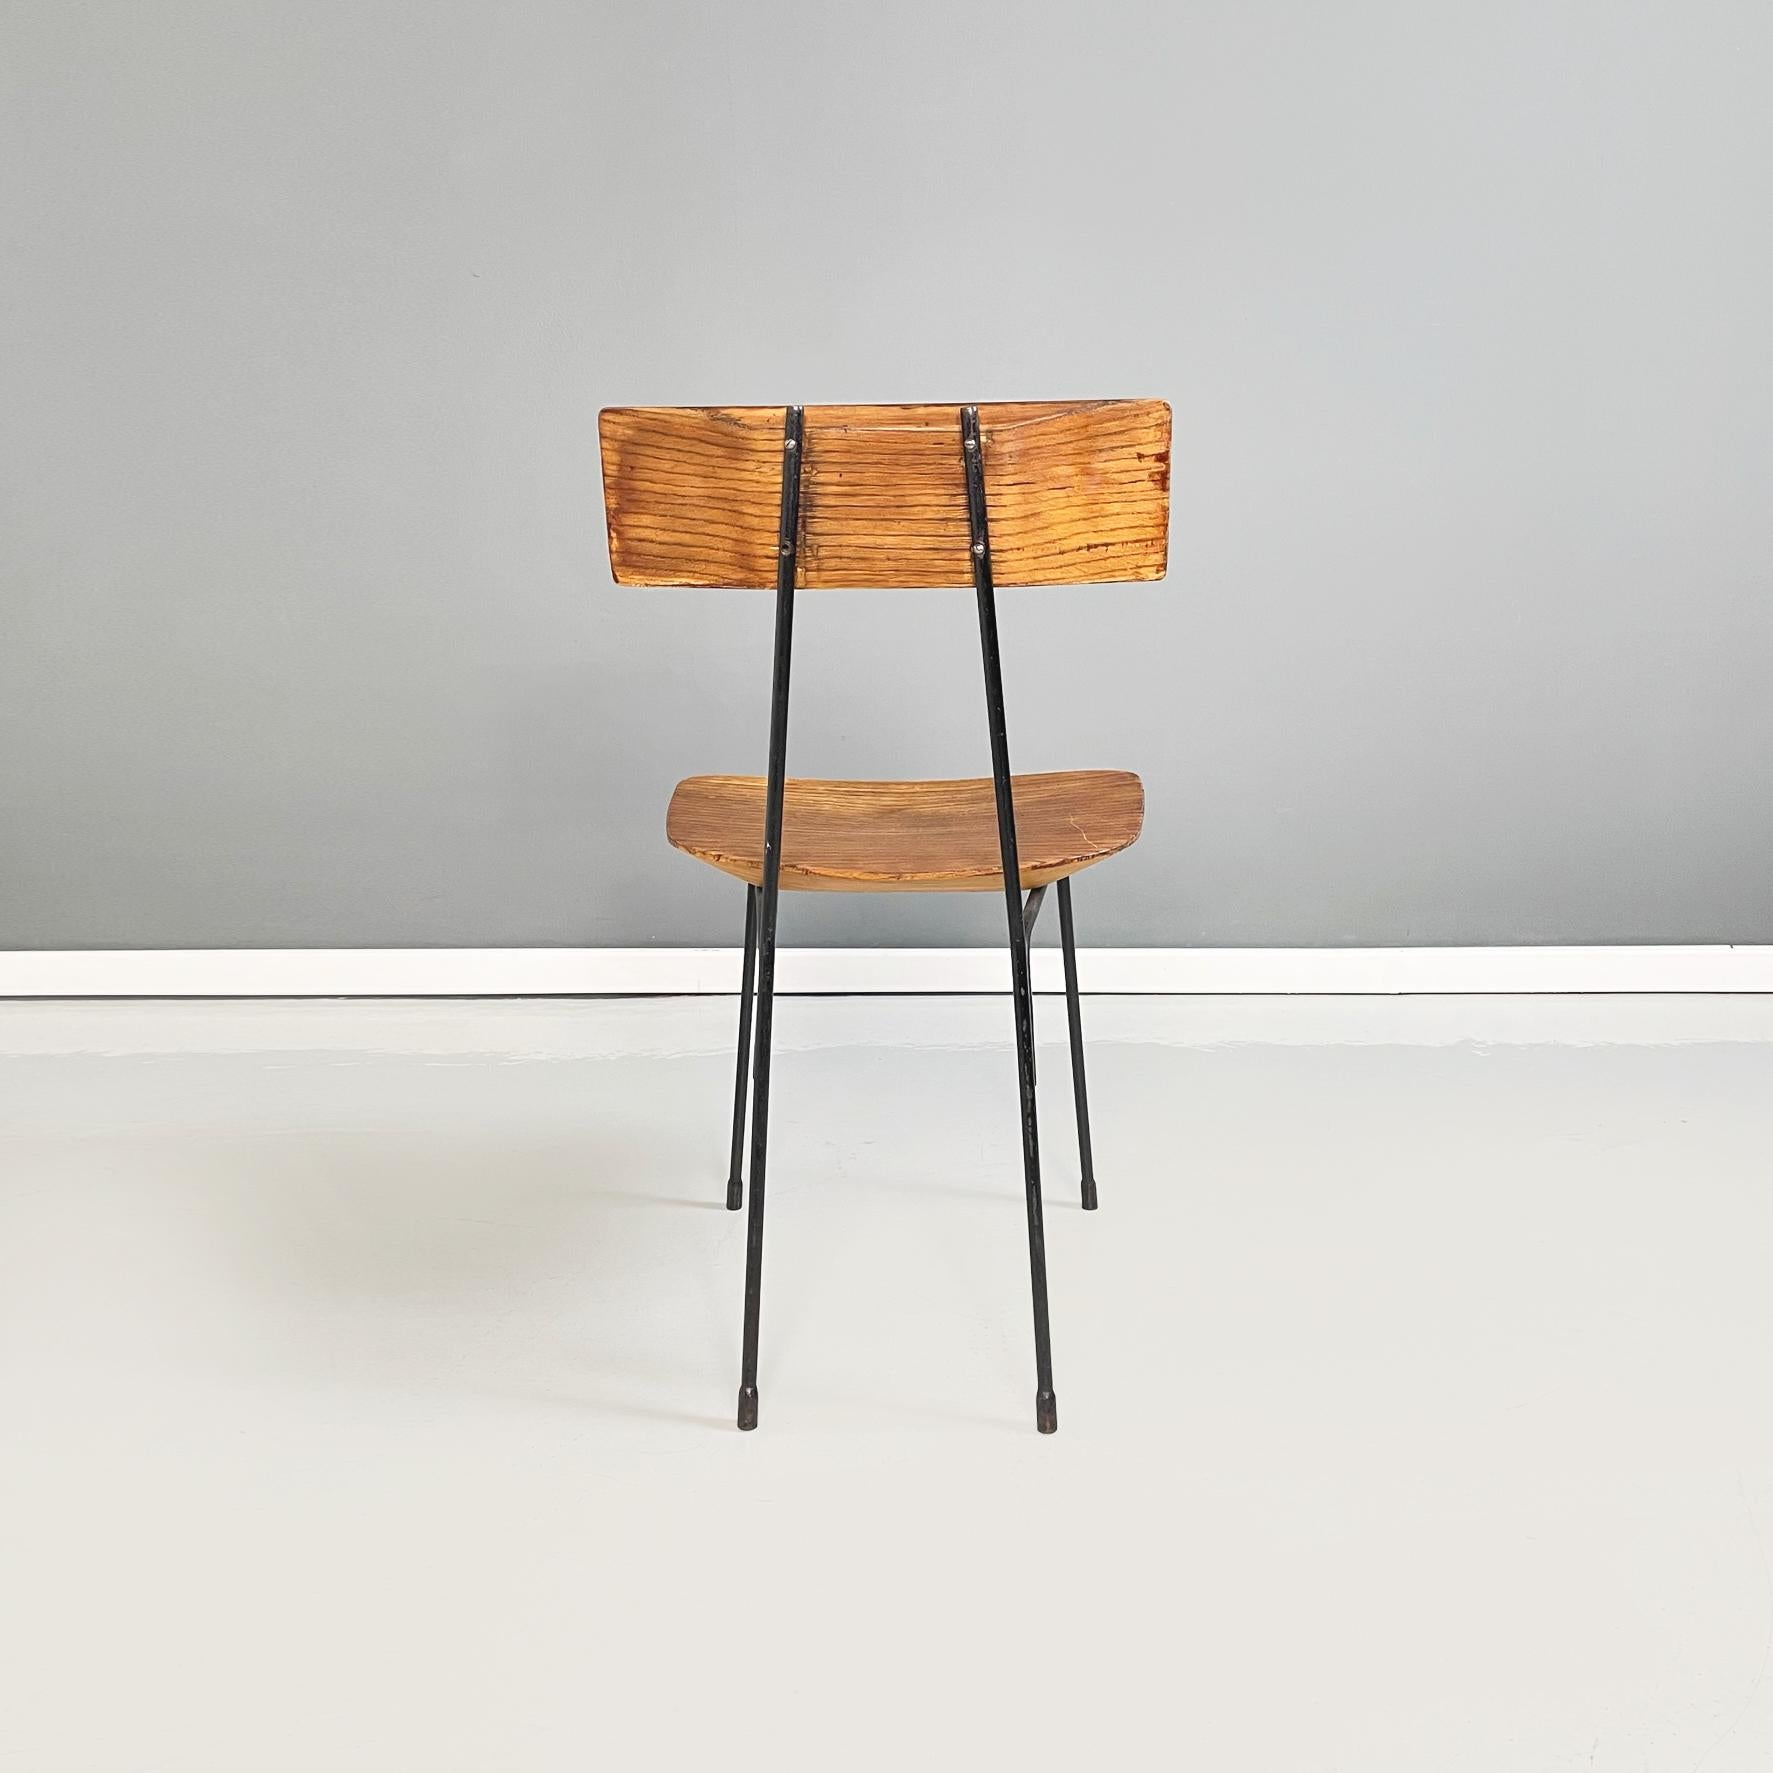 Mid-20th Century Italian Mid-Century Wooden and Black Enamelled Metal Rod Chair, 1950s For Sale